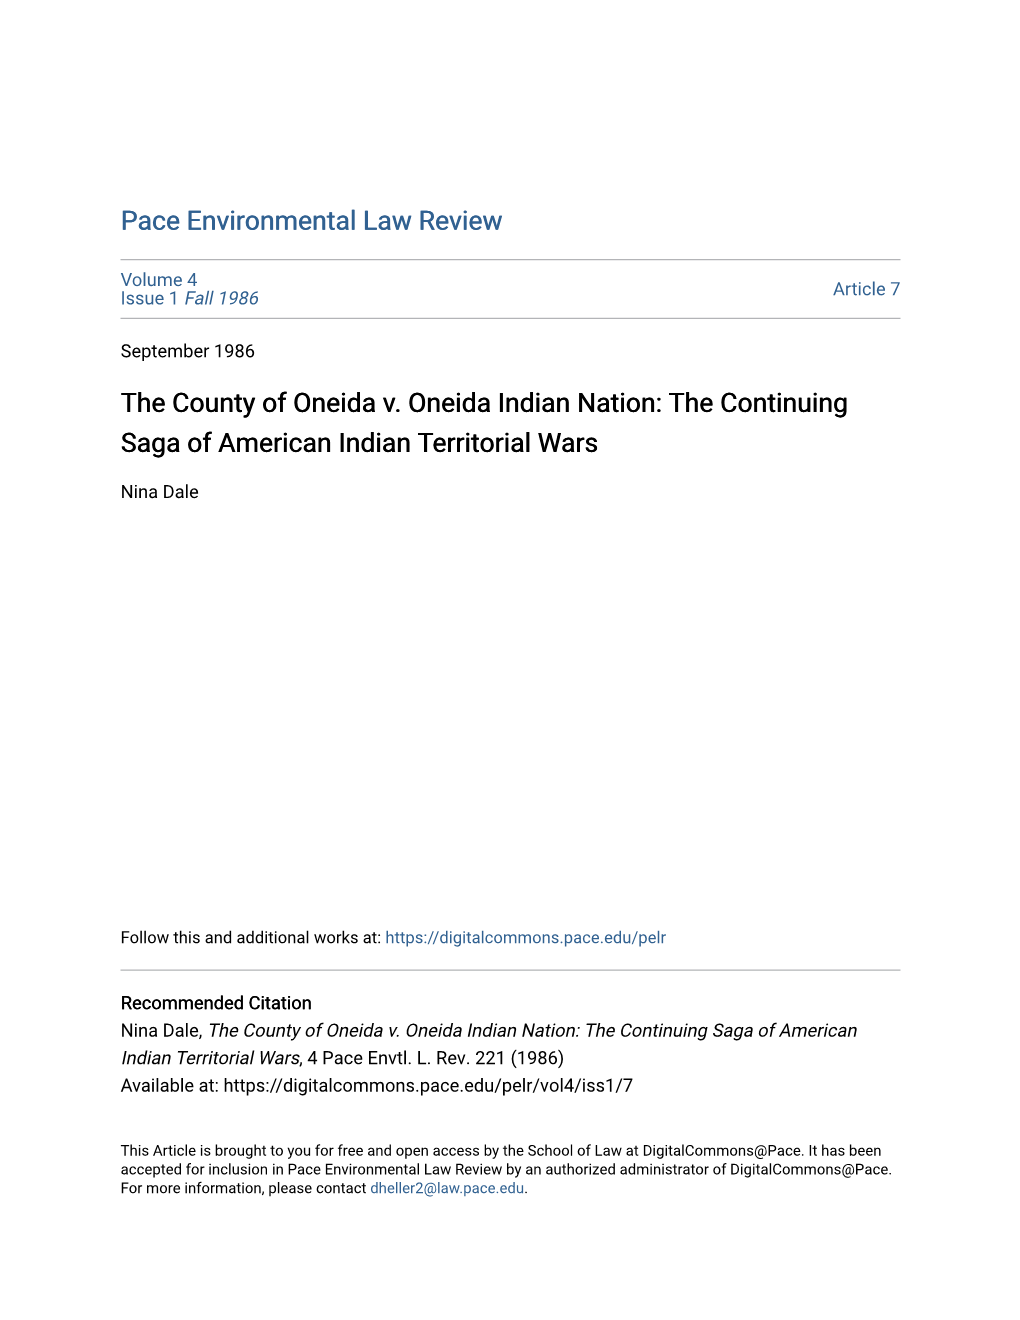 The County of Oneida V. Oneida Indian Nation: the Continuing Saga of American Indian Territorial Wars